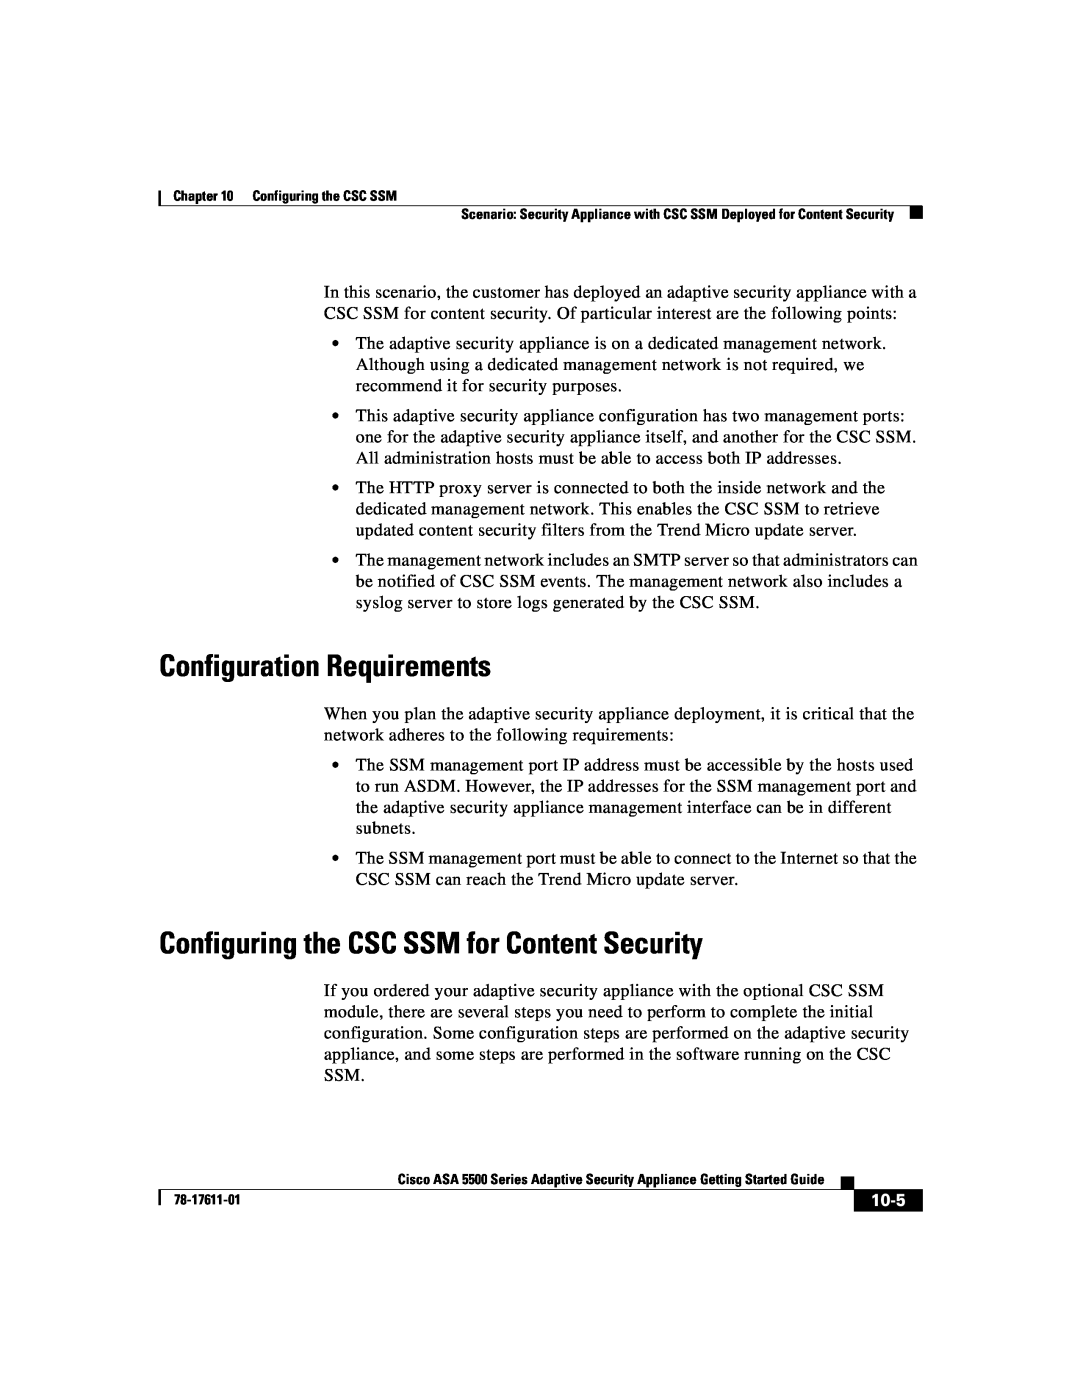 Cisco Systems ASA 5500 manual Configuring the CSC SSM for Content Security, Configuration Requirements, 10-5, 78-17611-01 